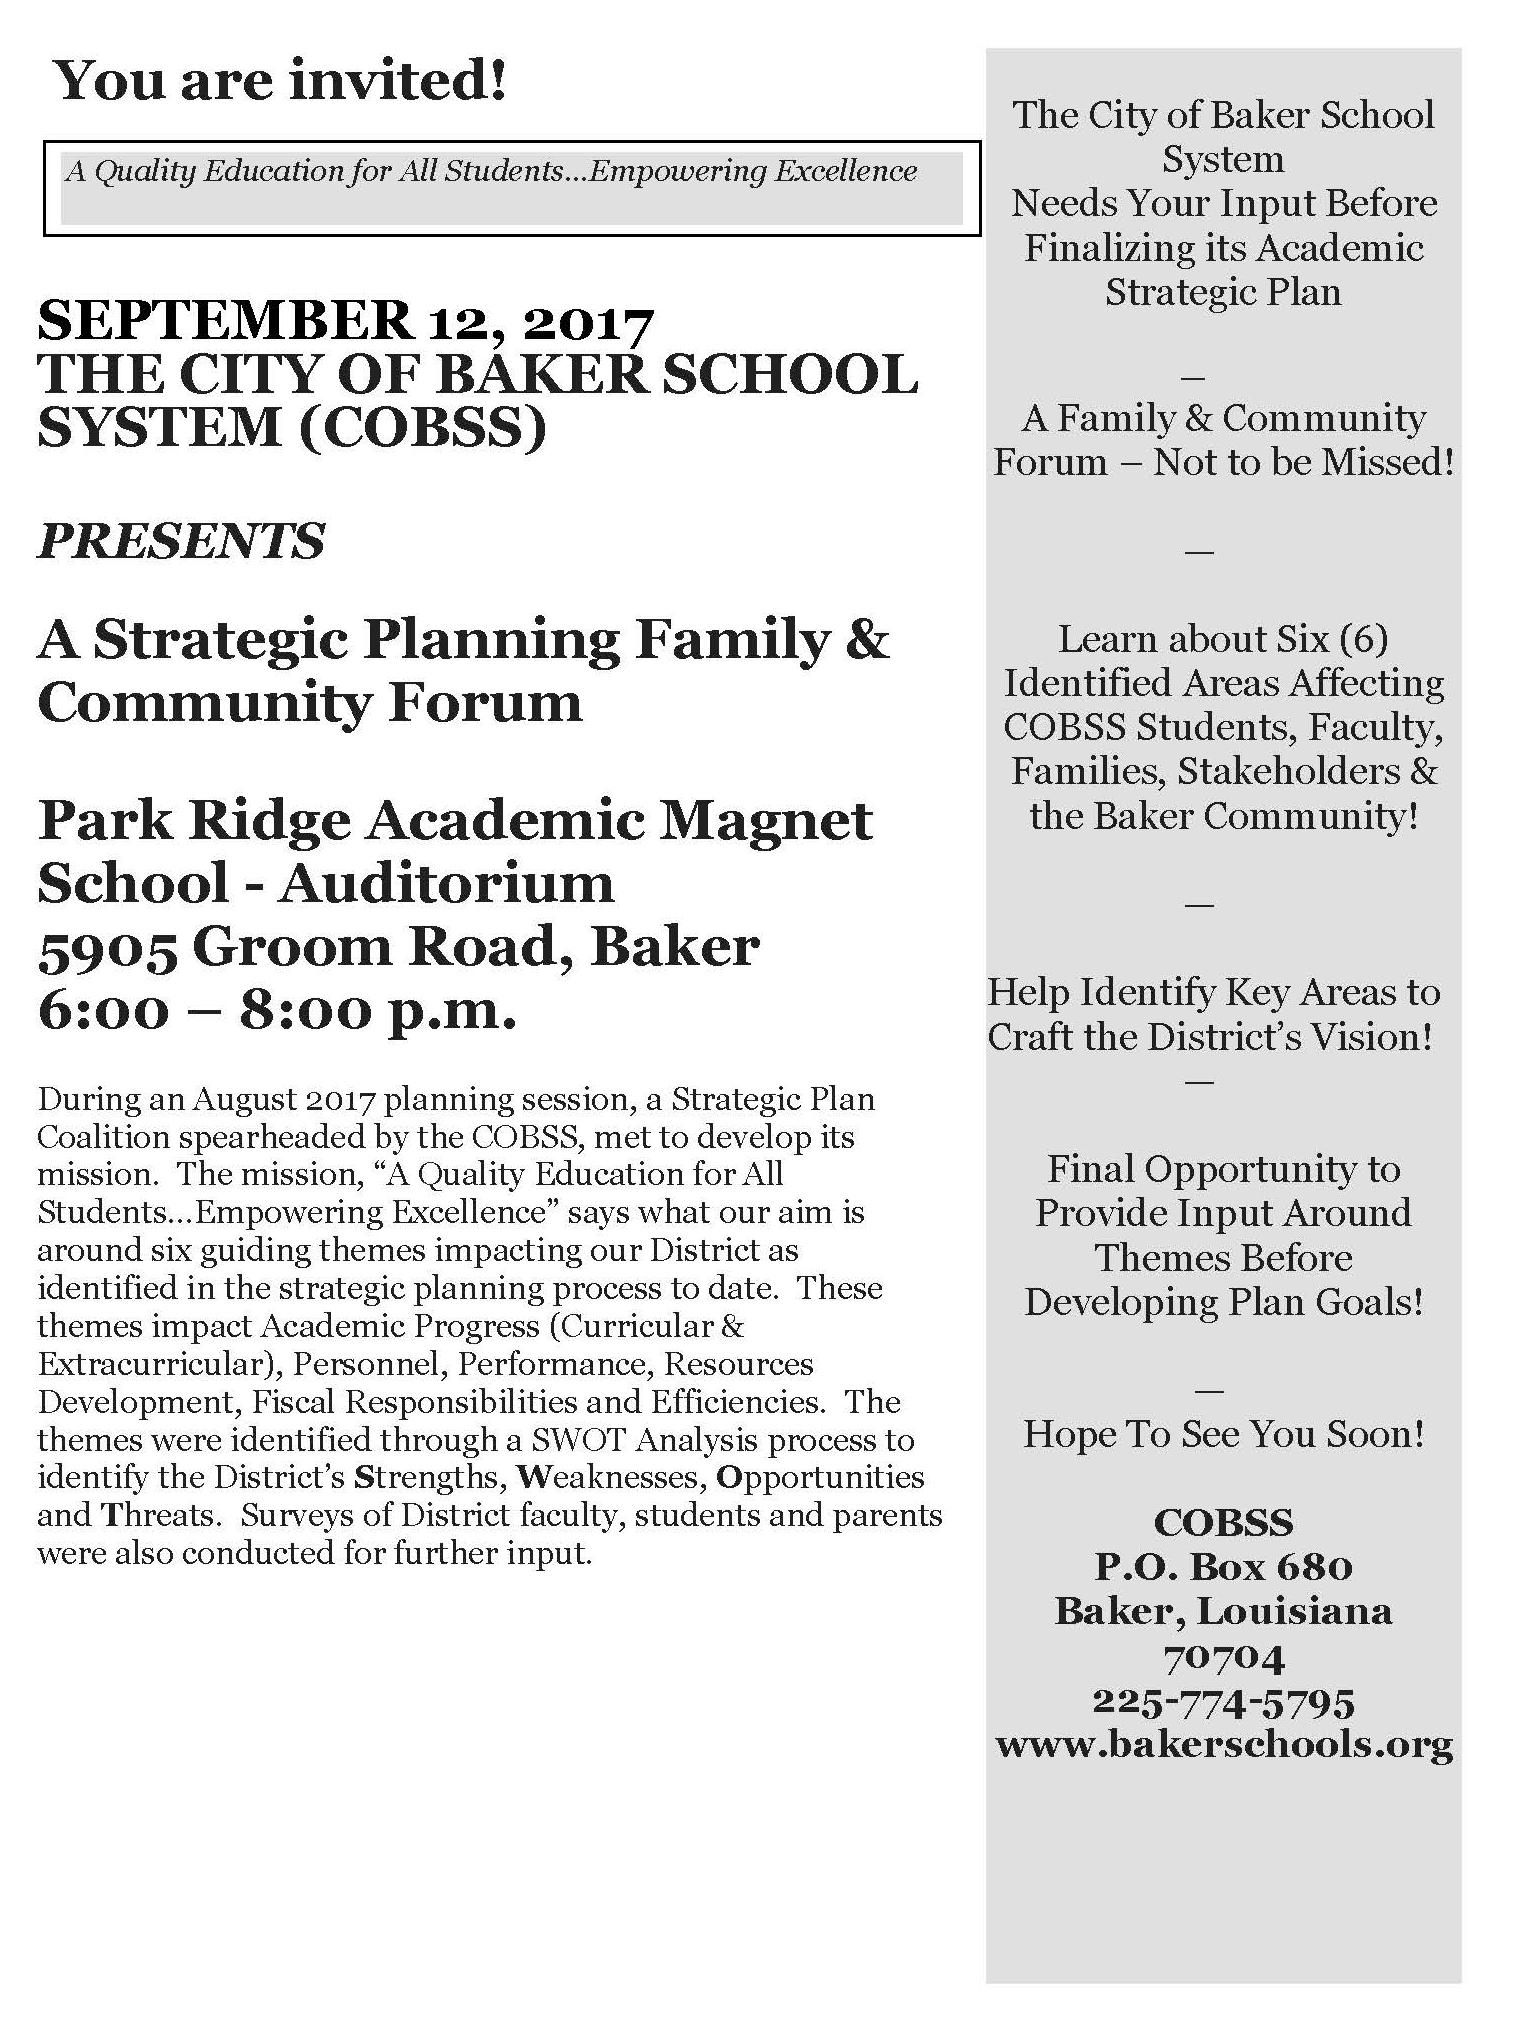 Photo of a public invitation to a forum on September 12, 2017, 6 p.m. at Park Ridge